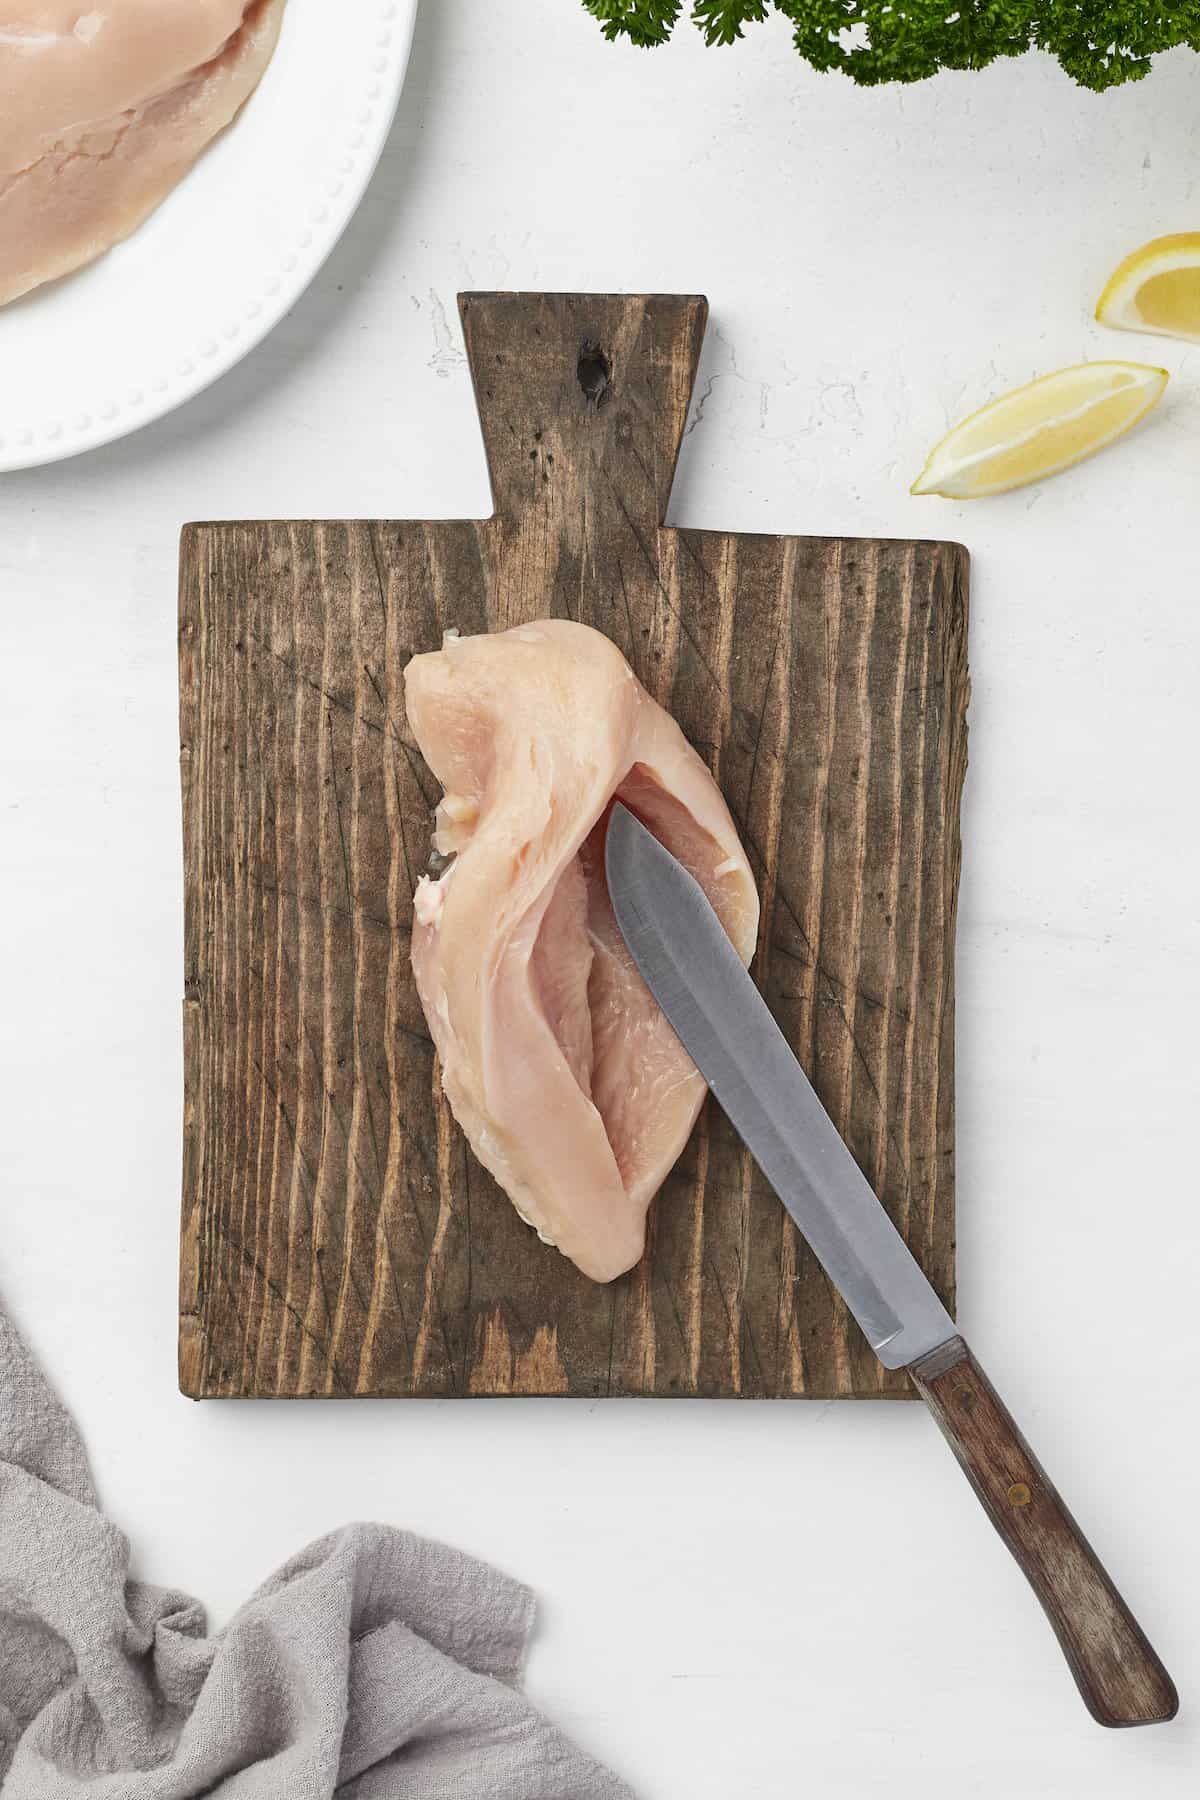 A boneless chicken breast with a slit cut into it on top of a cutting board with a knife